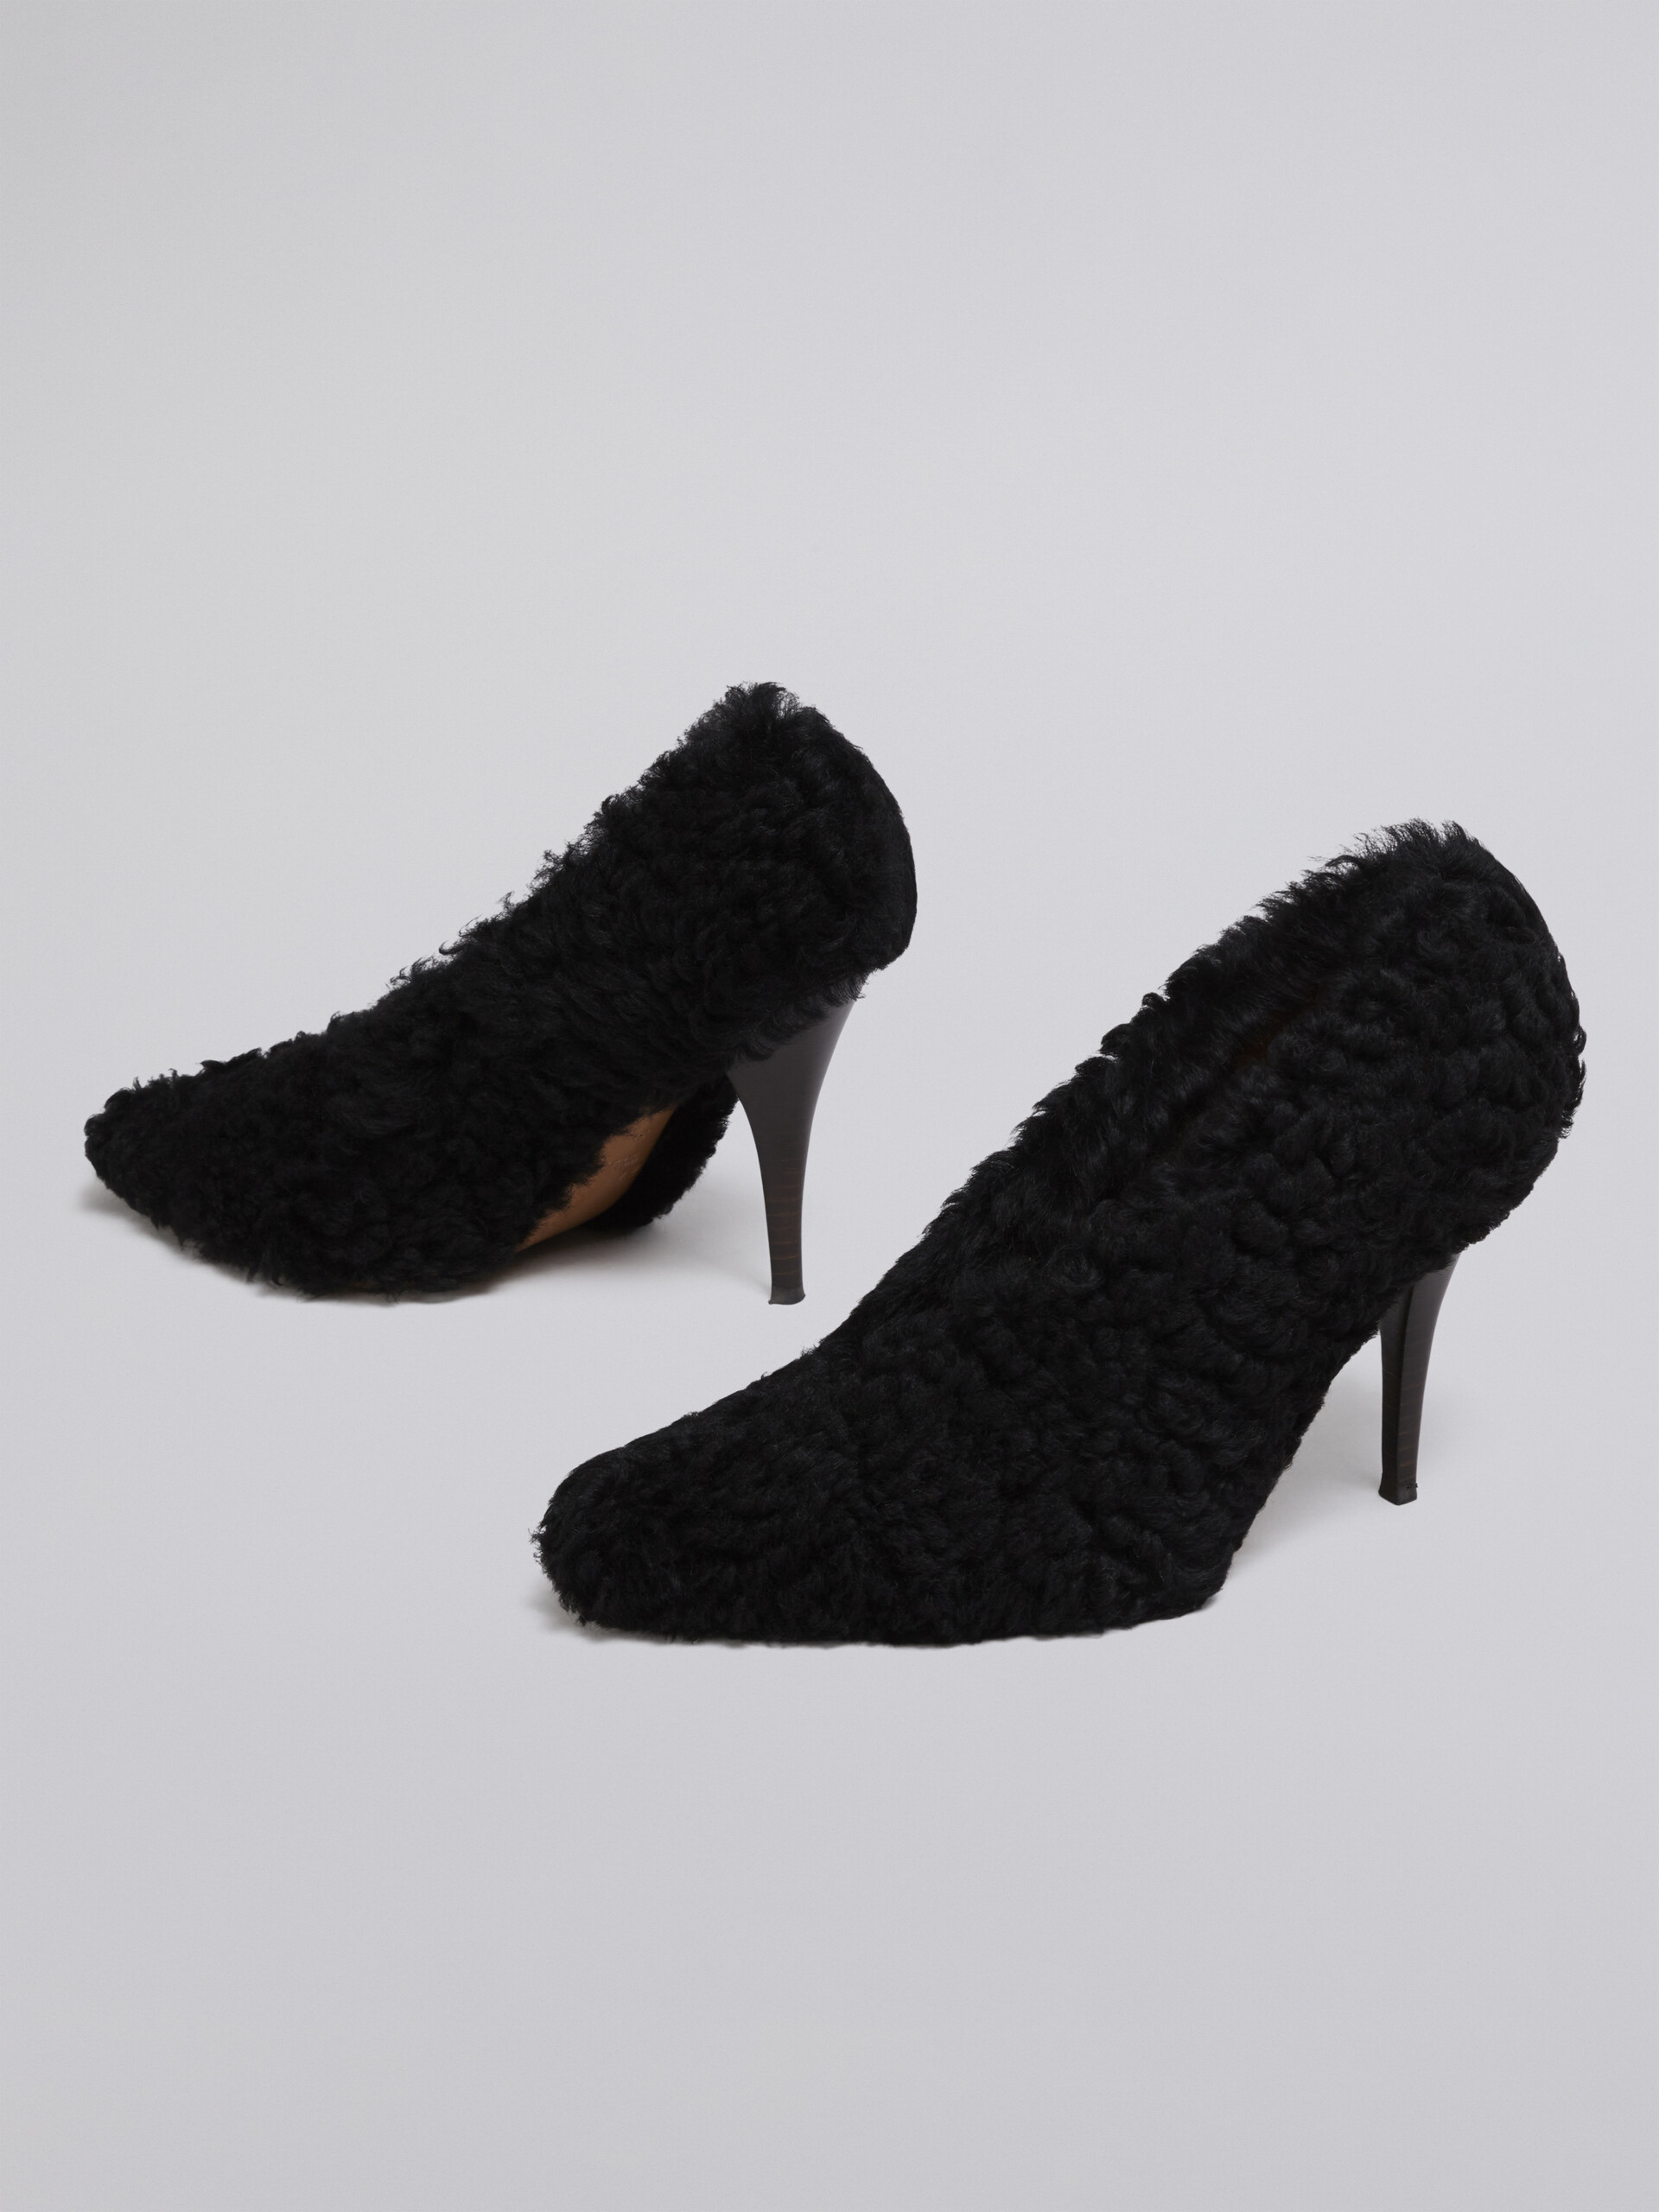 Shearling pump with heel covered in nappa - Pumps - Image 5